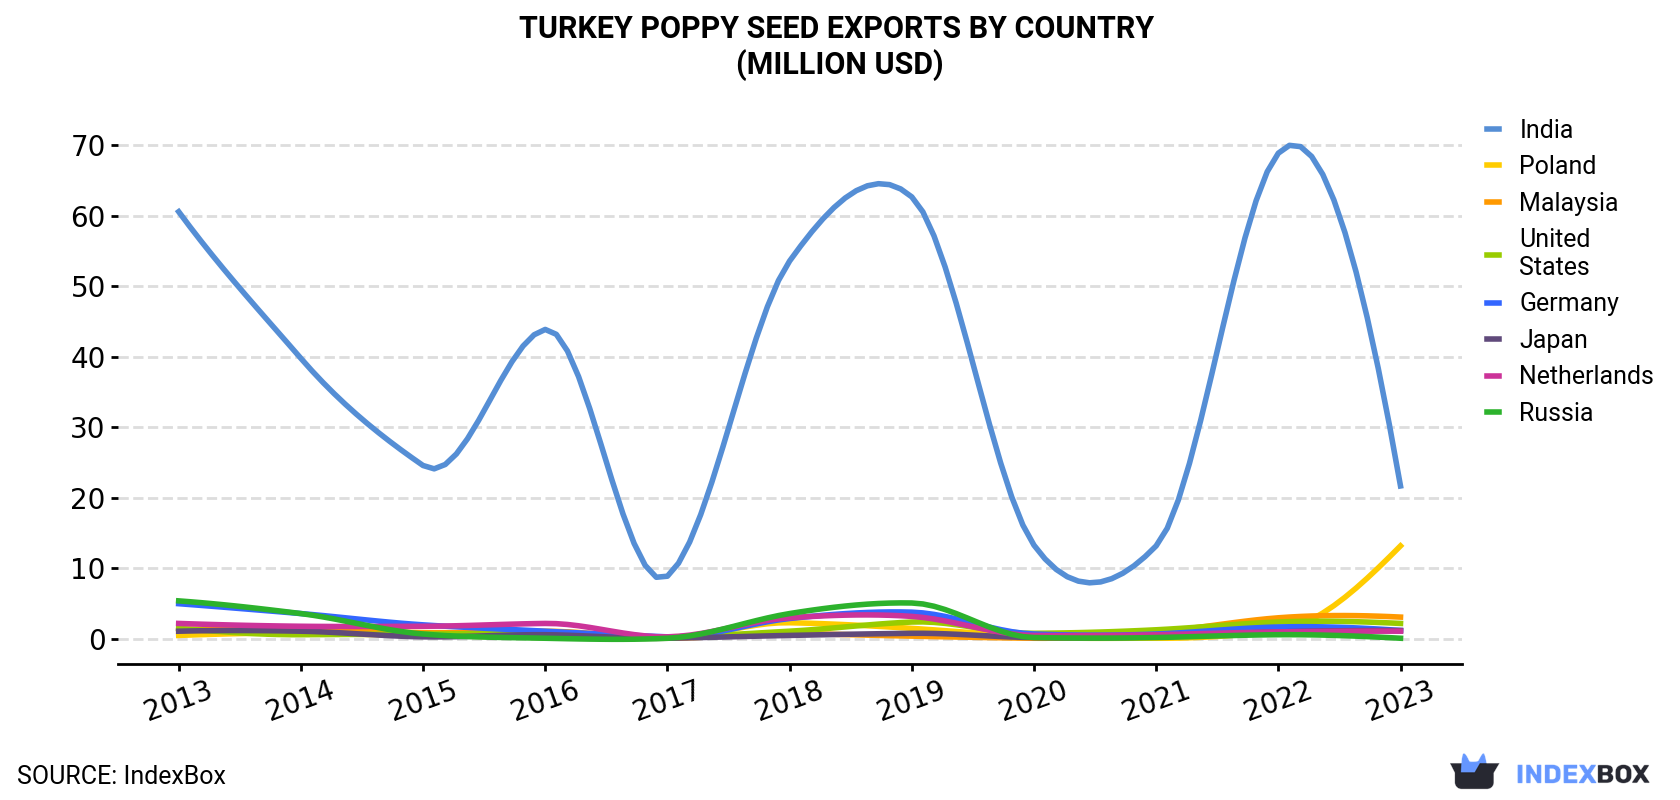 Turkey Poppy Seed Exports By Country (Million USD)